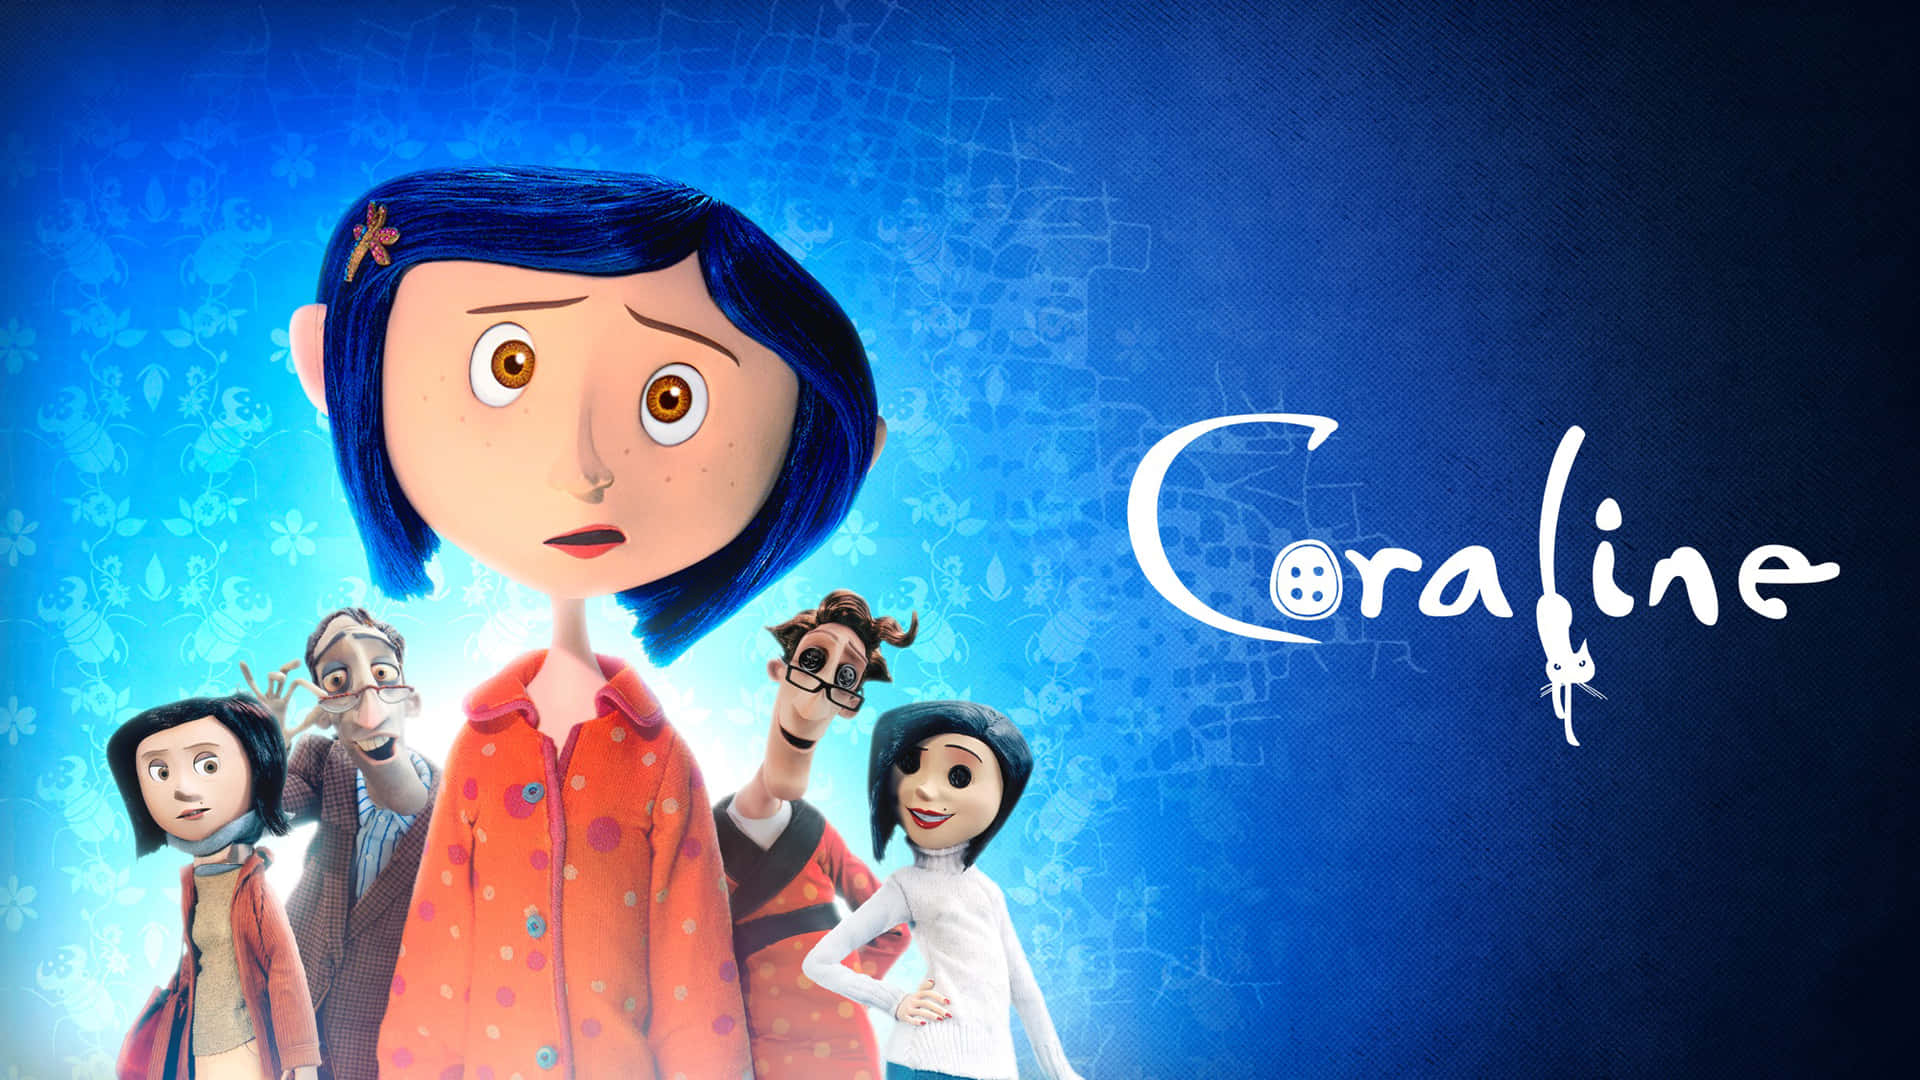 Coraline in a magical land captured in a stunning 3-D animation